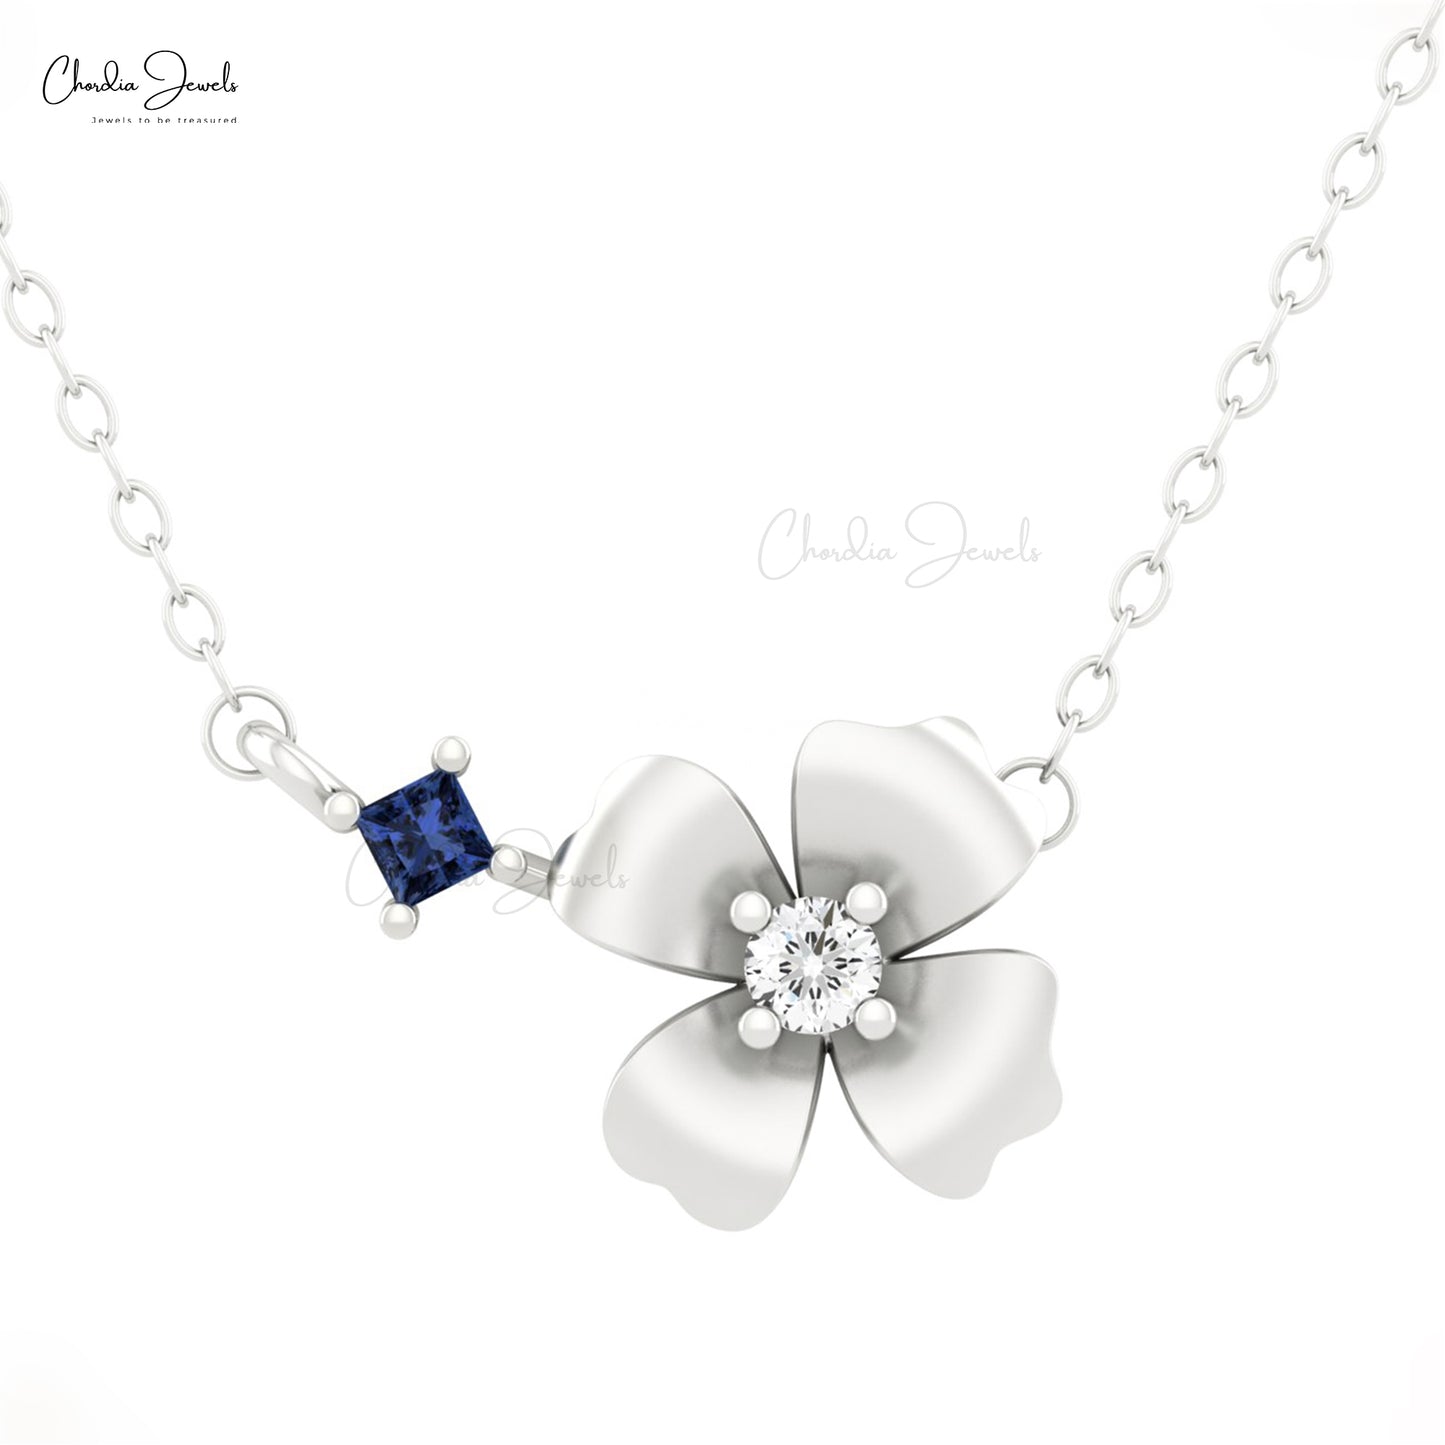 Unique Design Hot Sale Women Flower Shape Necklace Pendant Natural White Diamond and Blue Sapphire Necklace in 14k Pure Gold Gift For Her